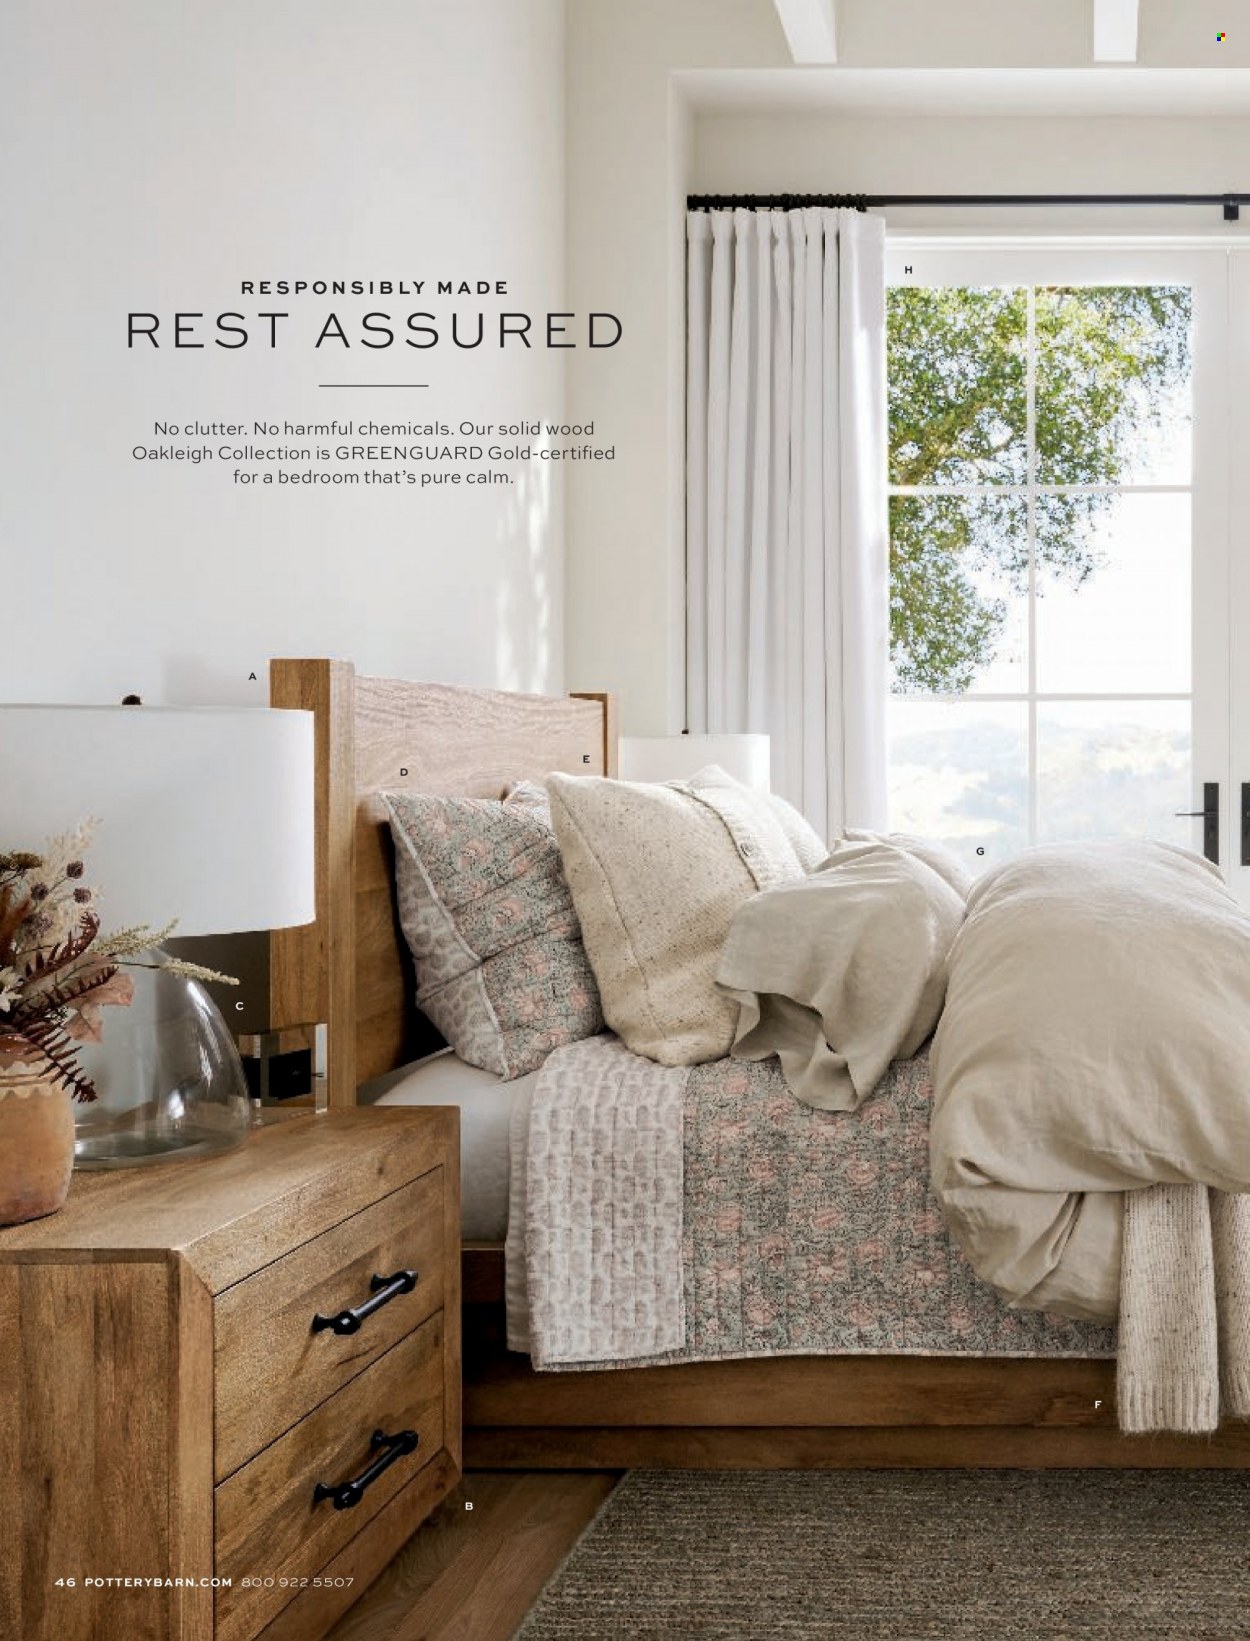 Pottery Barn flyer . Page 46.